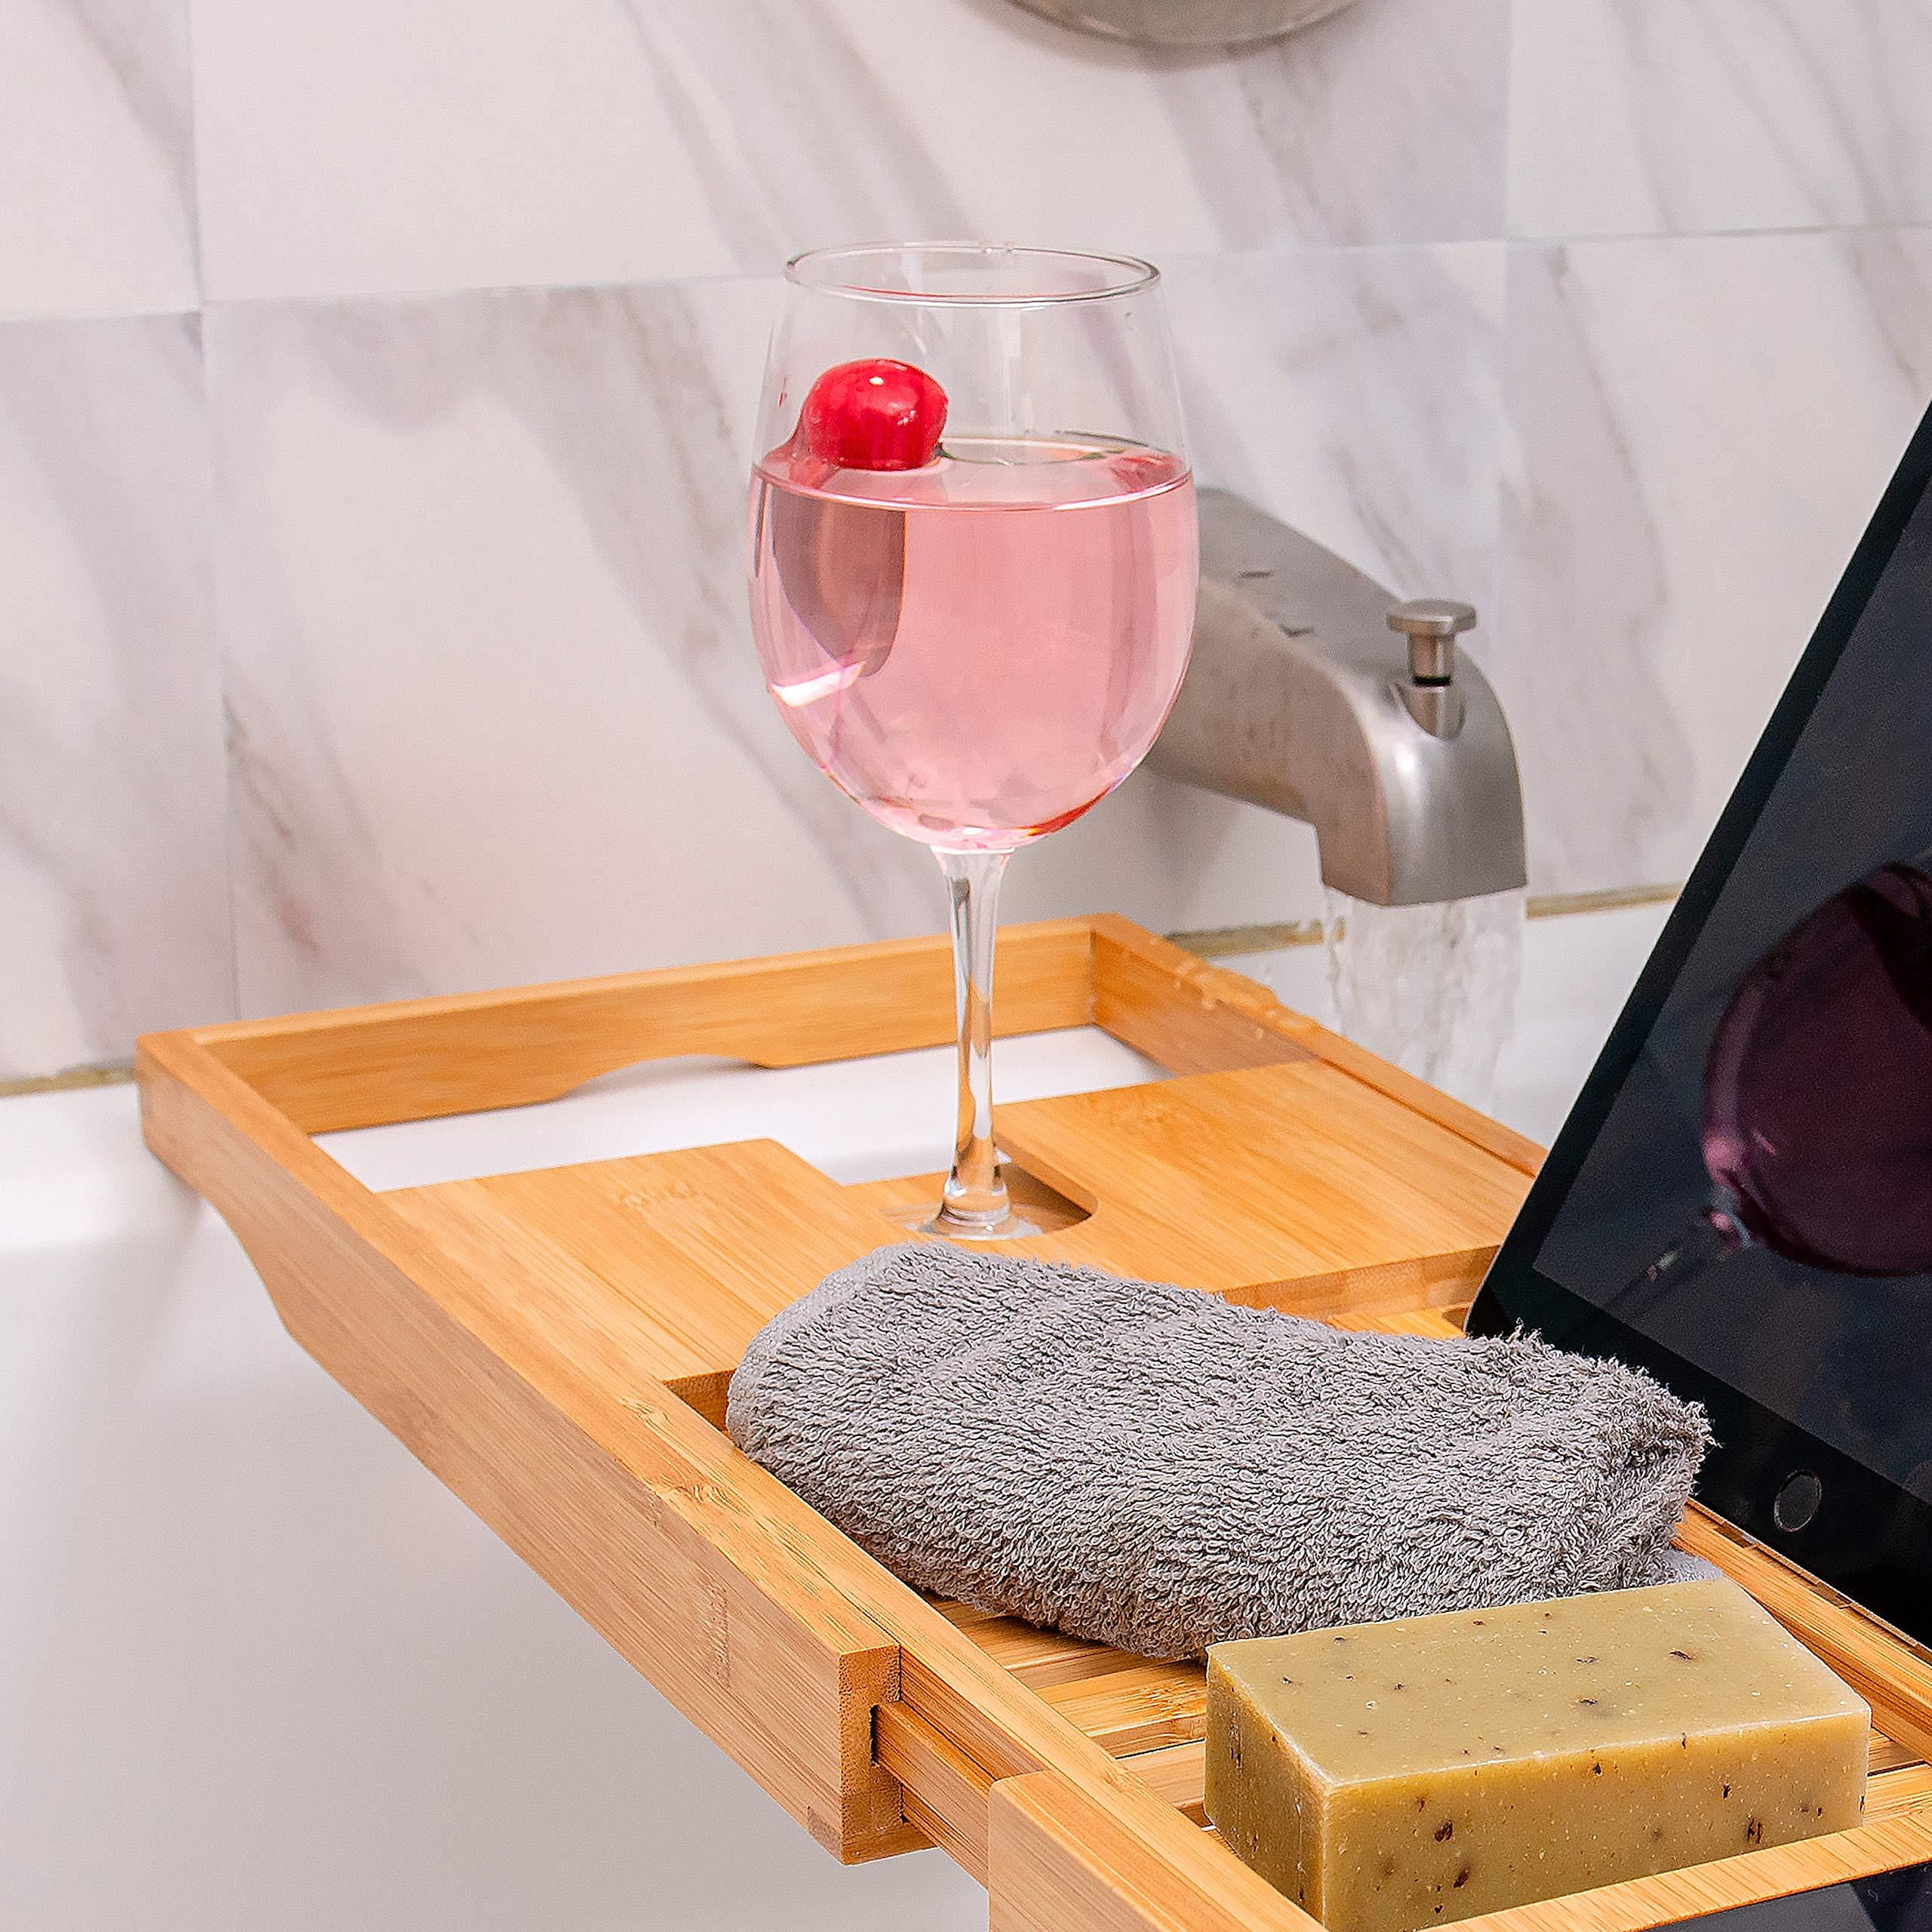 Casafield Bamboo Bathtub Caddy - Luxury Expandable Bath Tray - Adjustable Tub Organizer Holder for Tablet, Book, Phone, Wine Glass, Candles, and Soap